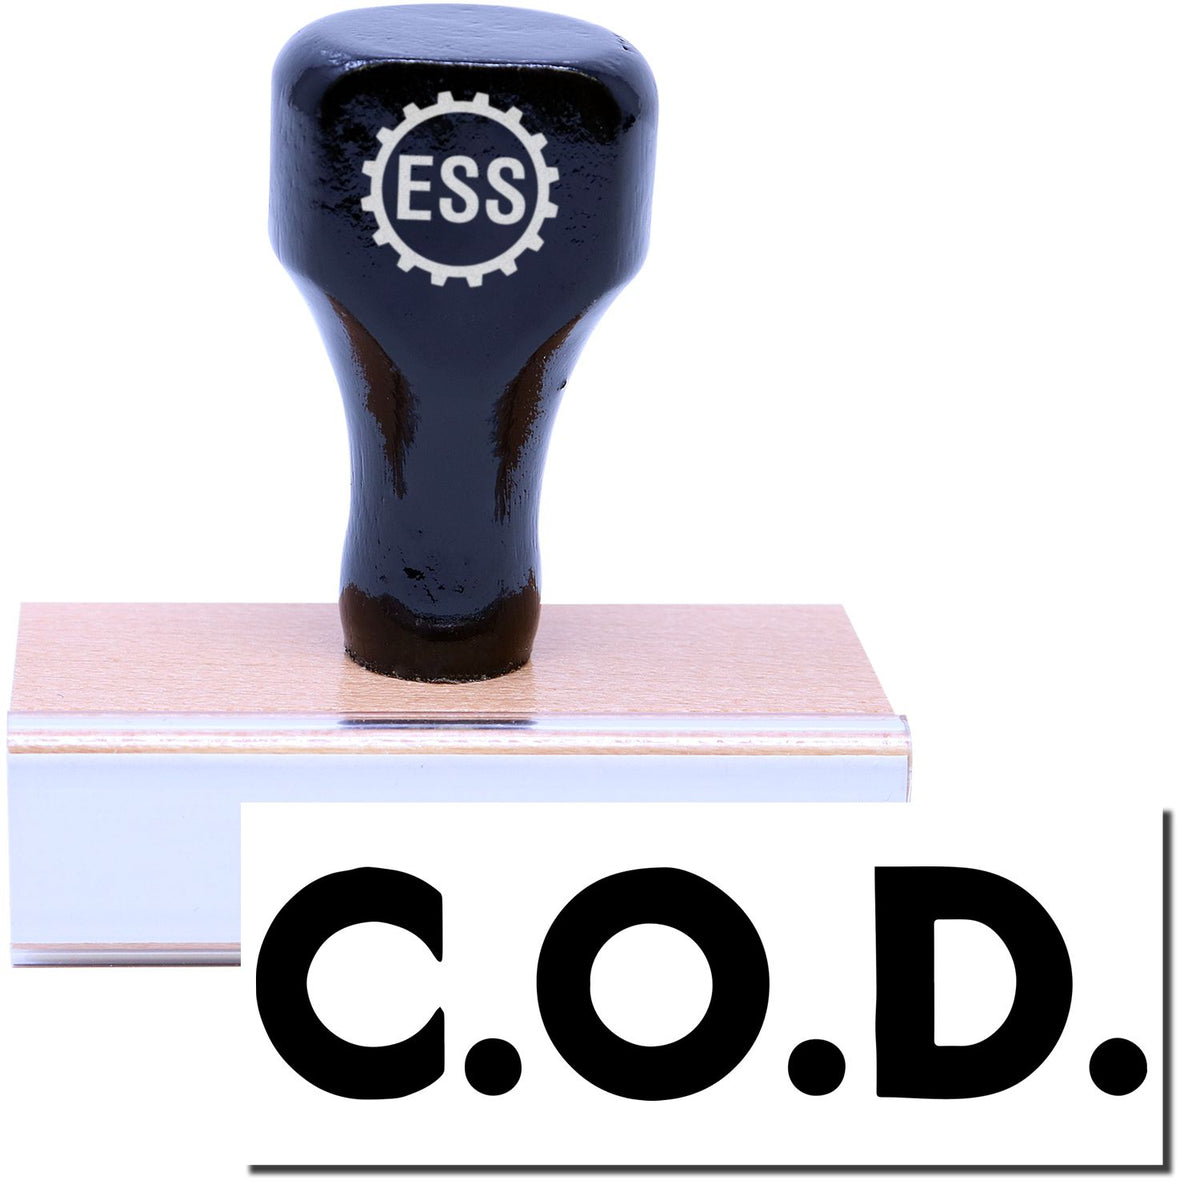 A stock office rubber stamp with a stamped image showing how the text &quot;C.O.D.&quot; in a large bold font is displayed after stamping.